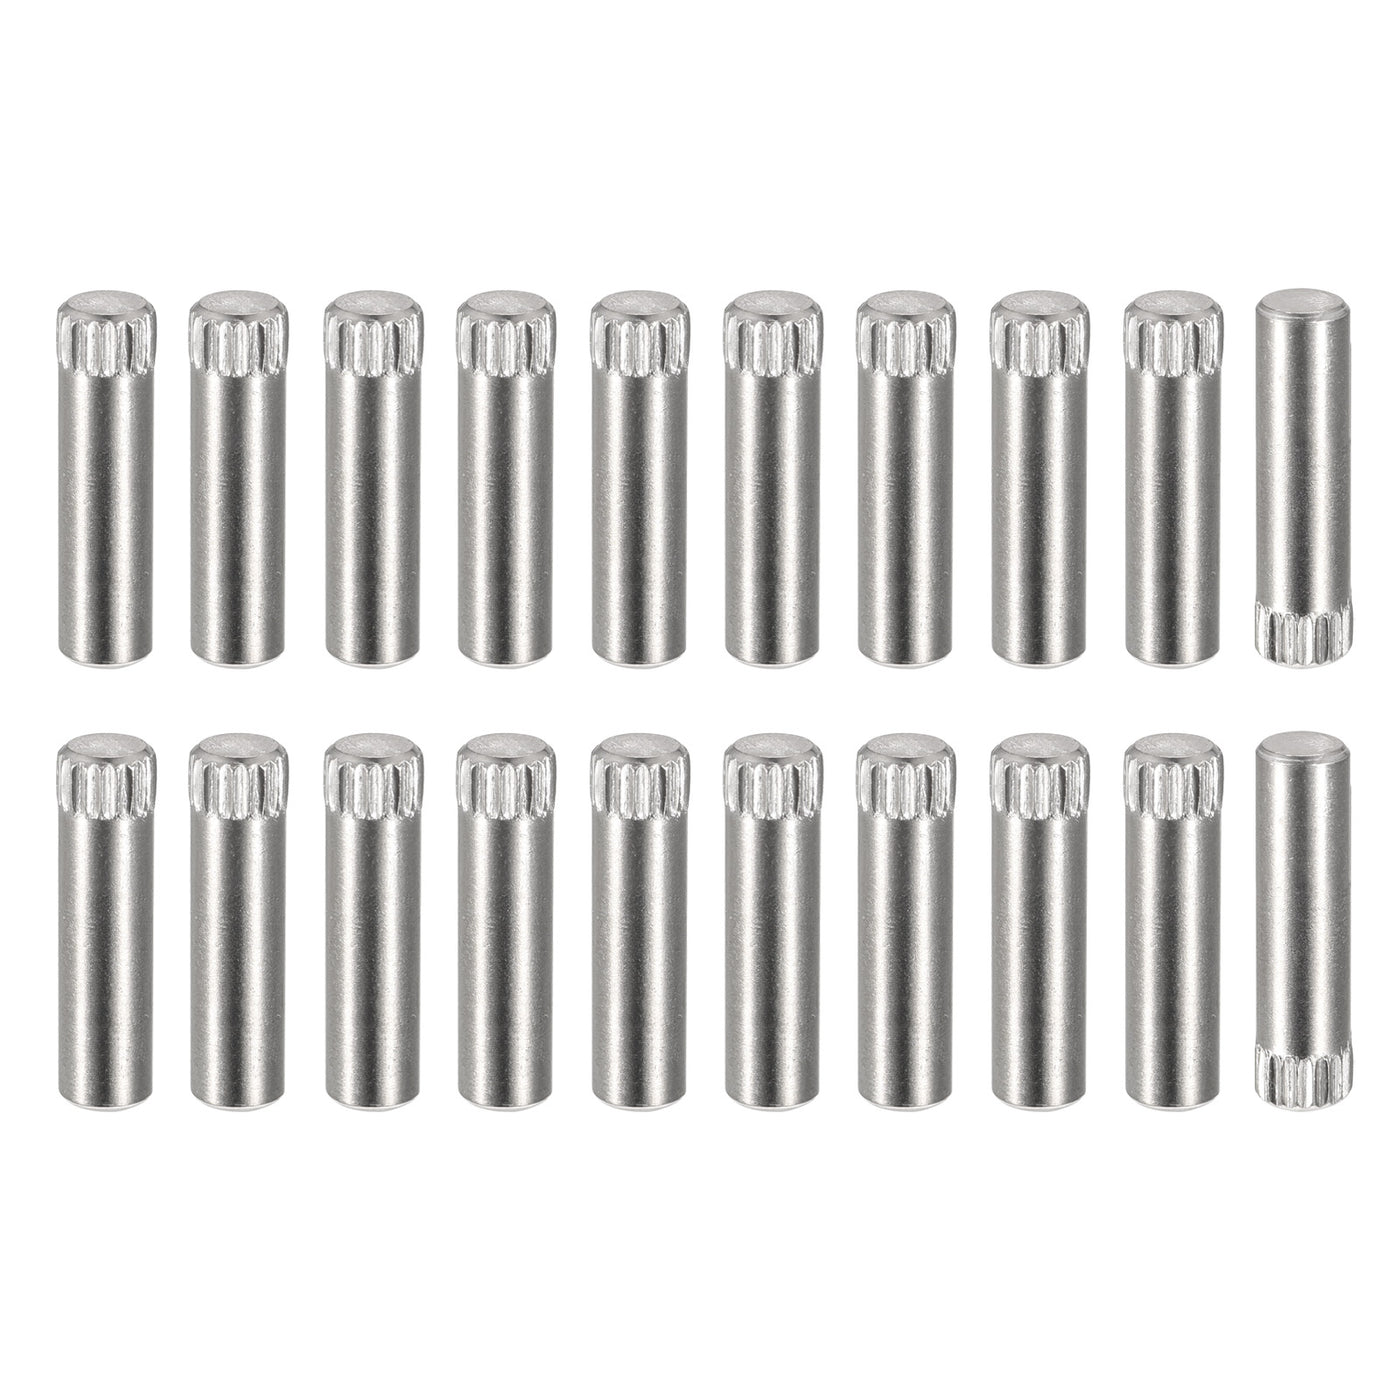 uxcell Uxcell 5x20mm 304 Stainless Steel Dowel Pins, 20Pcs Knurled Head Flat End Dowel Pin